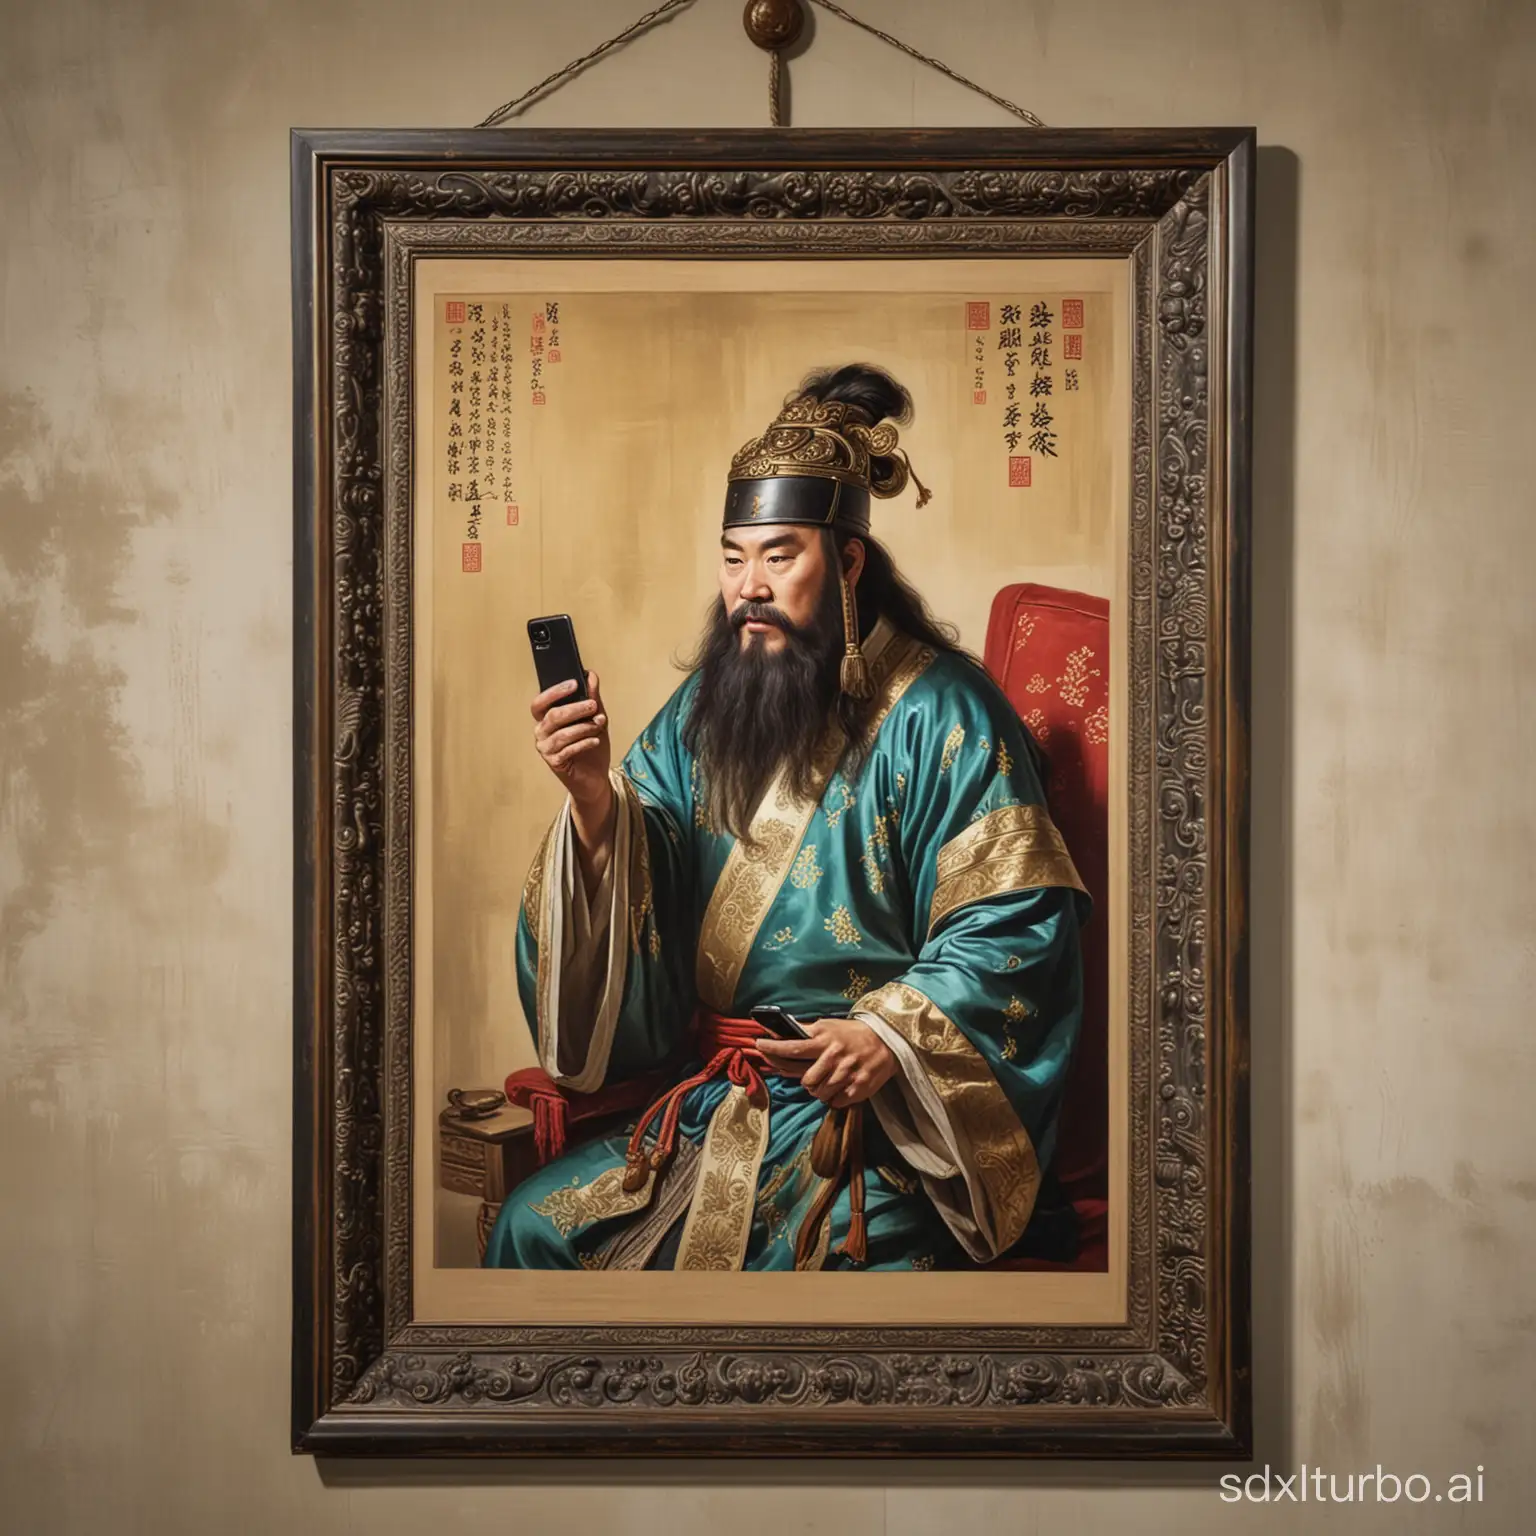 A painting hanging is Guan Gong looking at a cellphone.